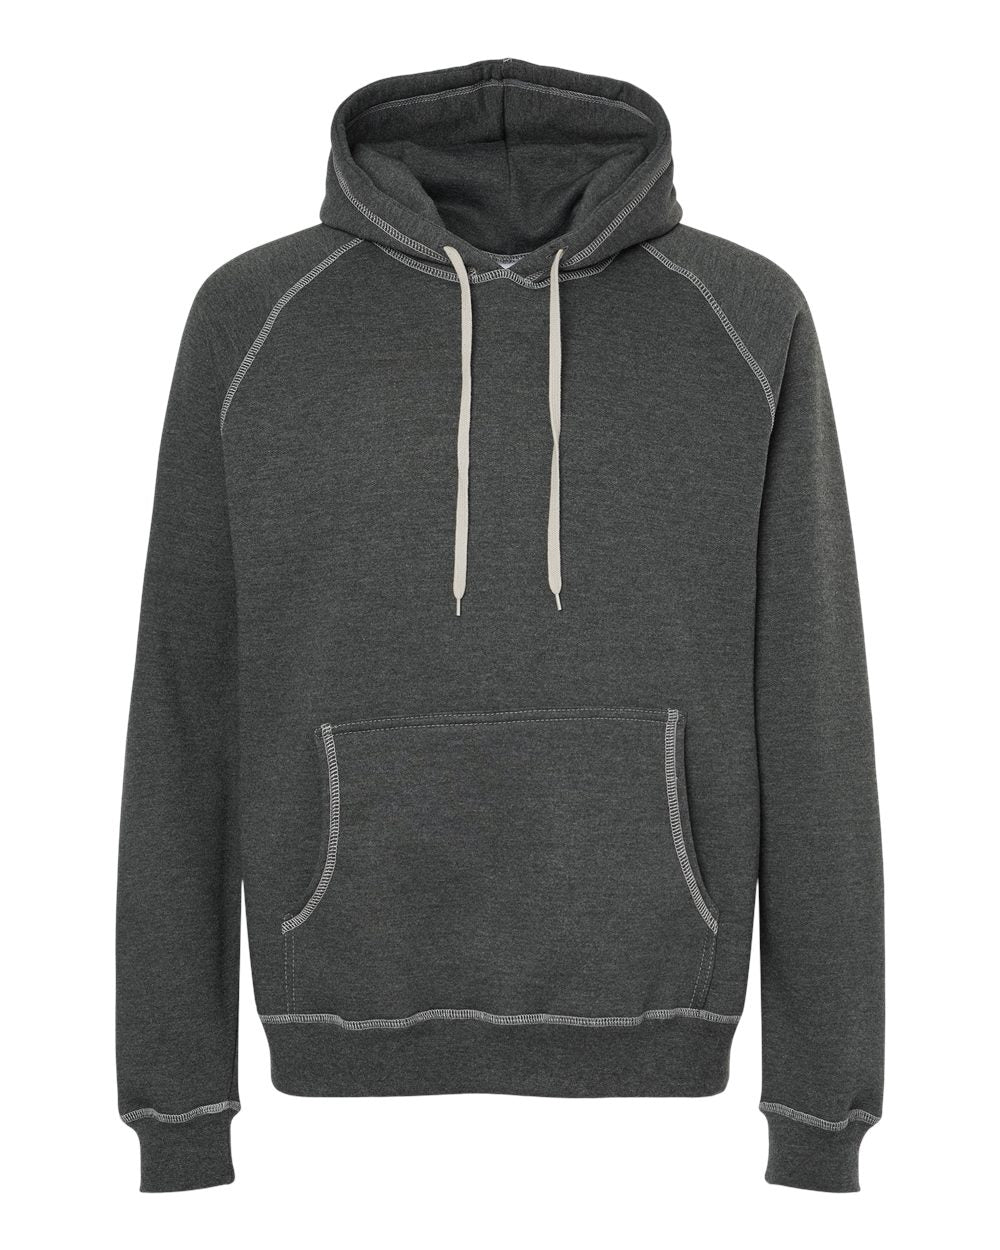 King Fashion Extra Heavy Hooded Pullover KP8011 #color_Charcoal Mix